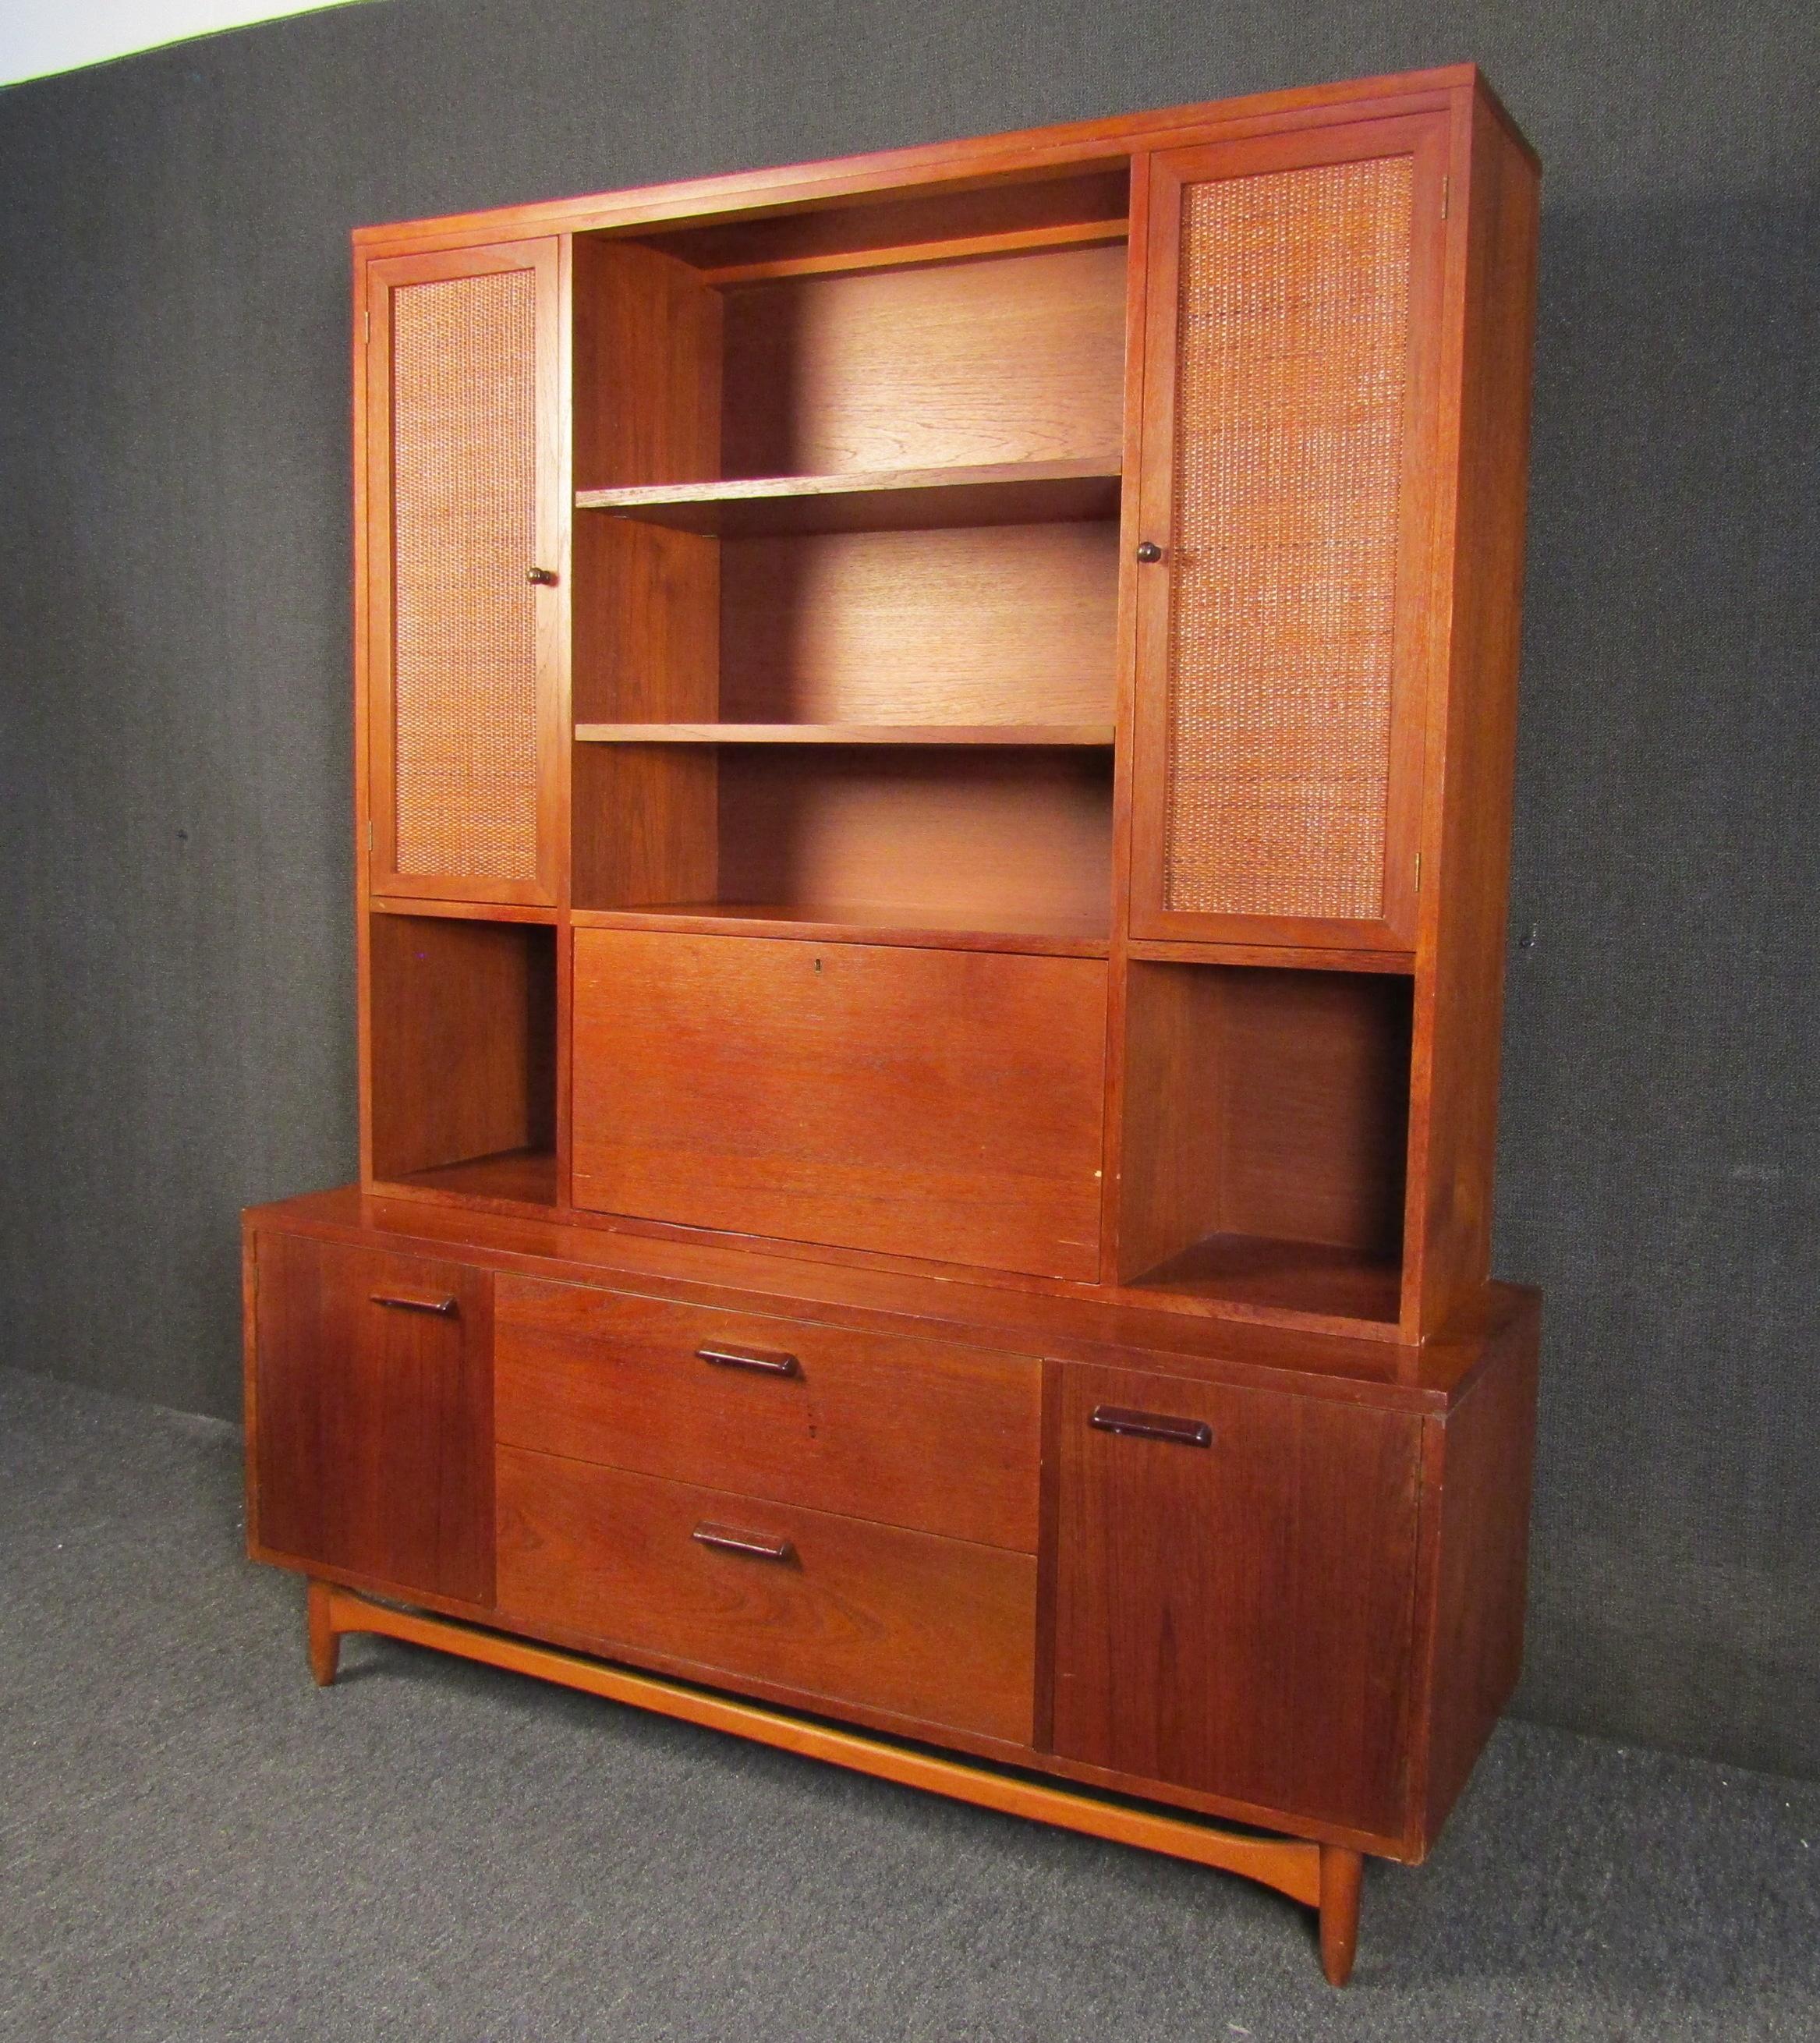 An incredible walnut Mid-Century Modern wall unit by acclaimed furniture maker Lane. Made in the USA with solid craftsmanship and timeless design, this wall unit is a lasting addition to any home sure to be around for generations. Please confirm